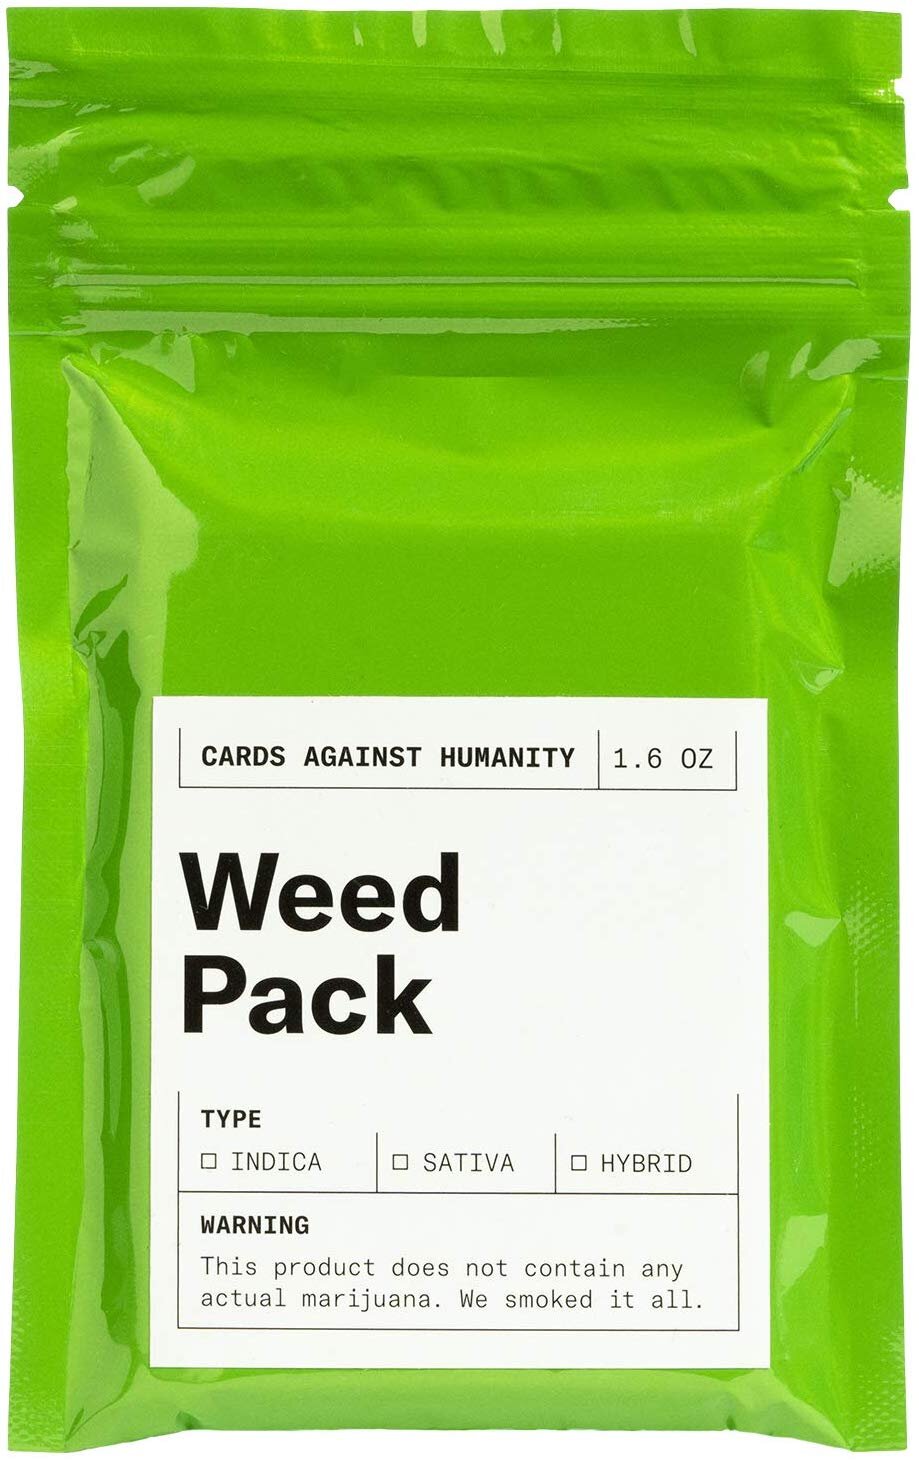 Cards Against Humanity Weed Pack